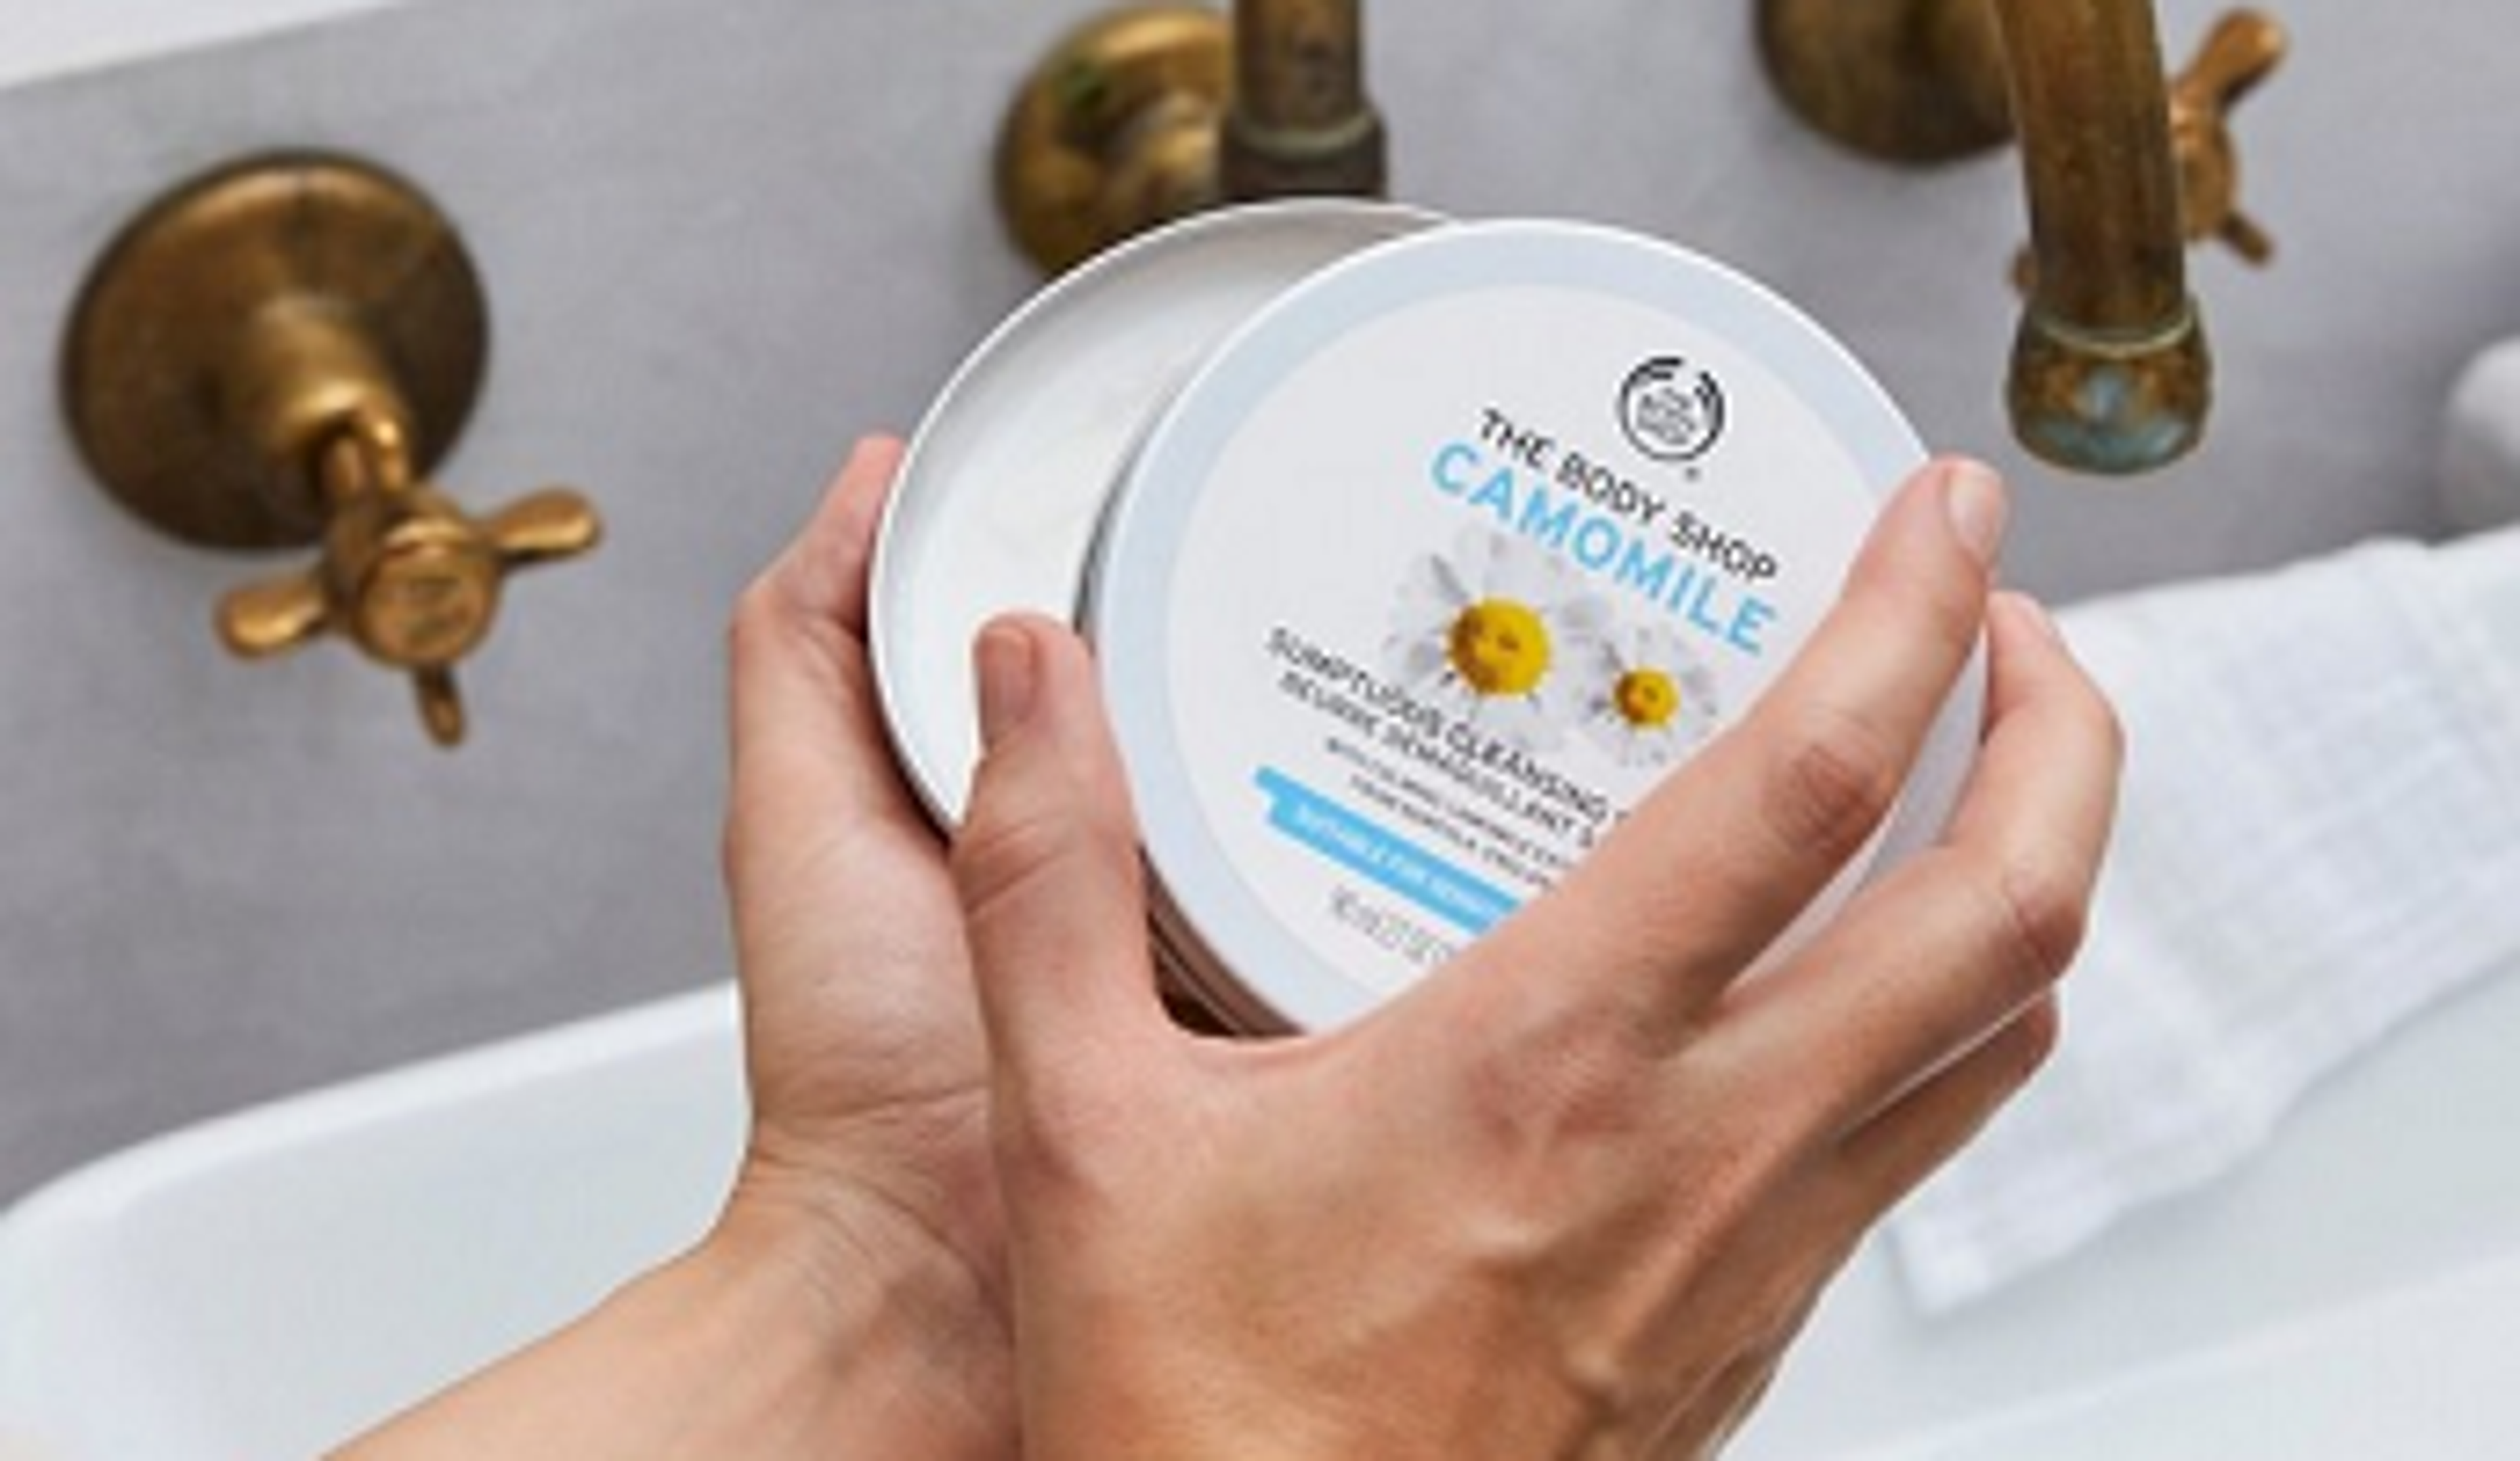  The Body Shop Camomile Cleansing Butter being opened near taps 